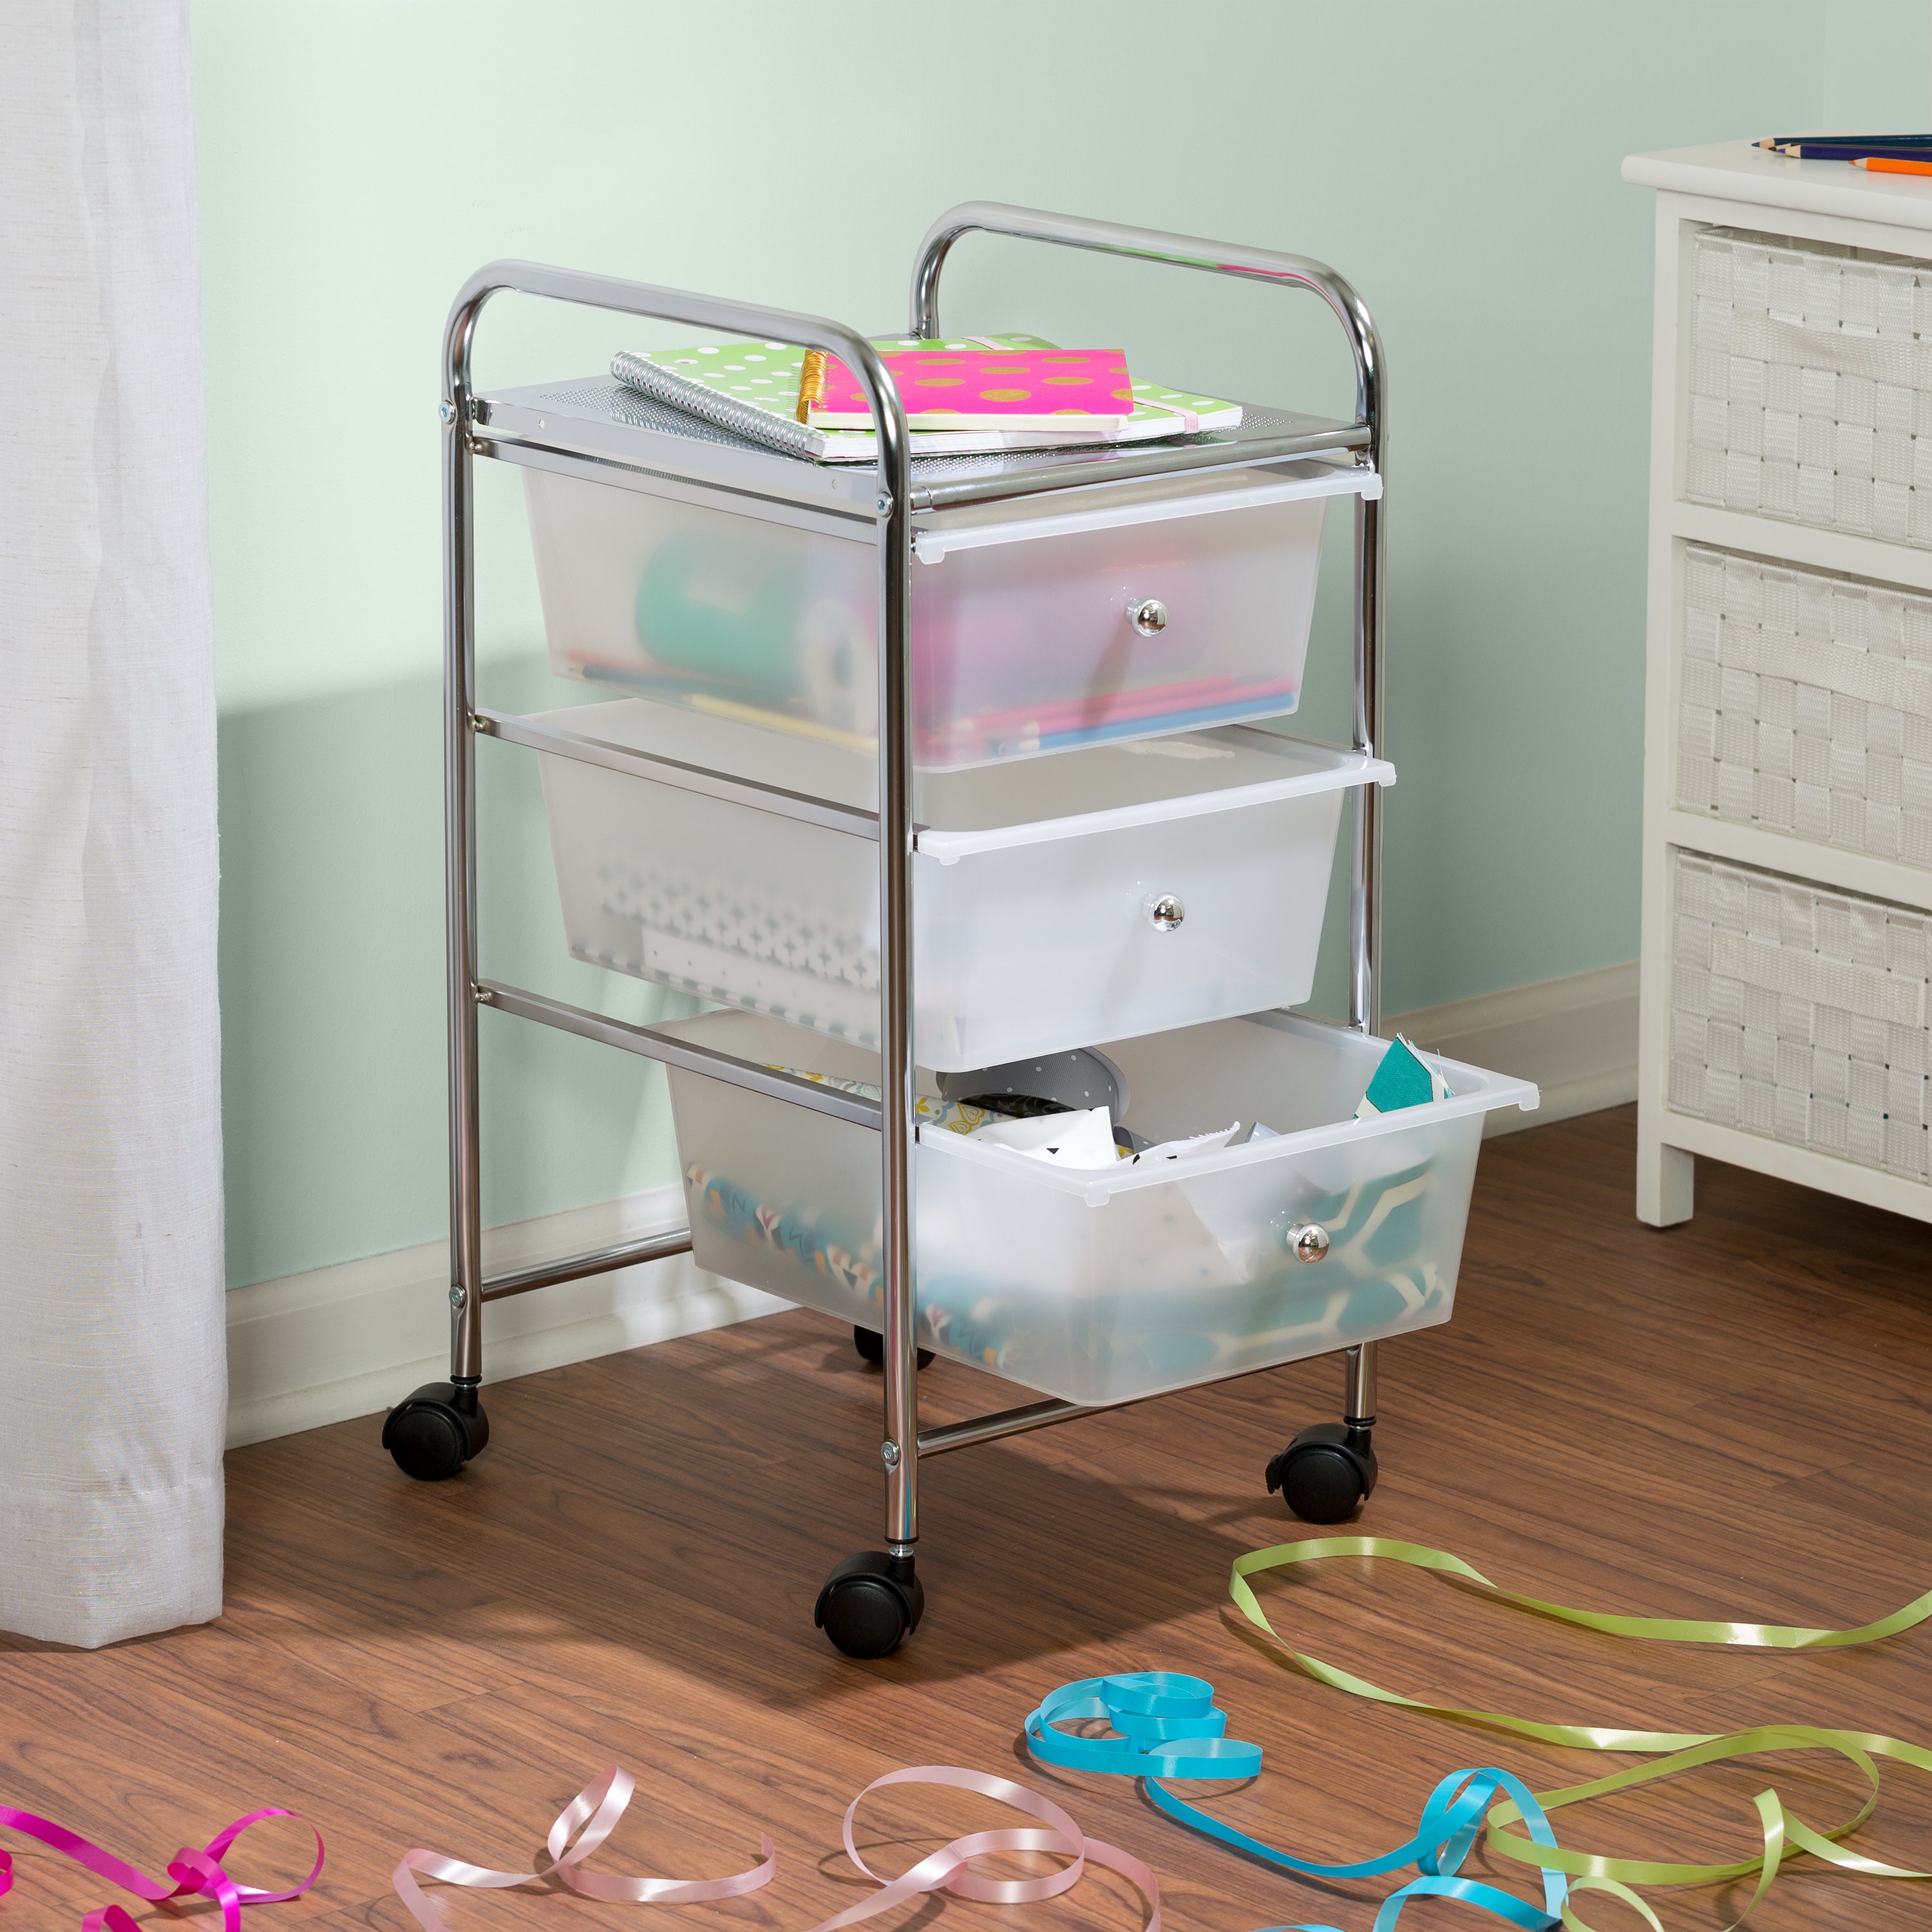 Chrome/Clear 3-Drawer Rolling Organizer Cart